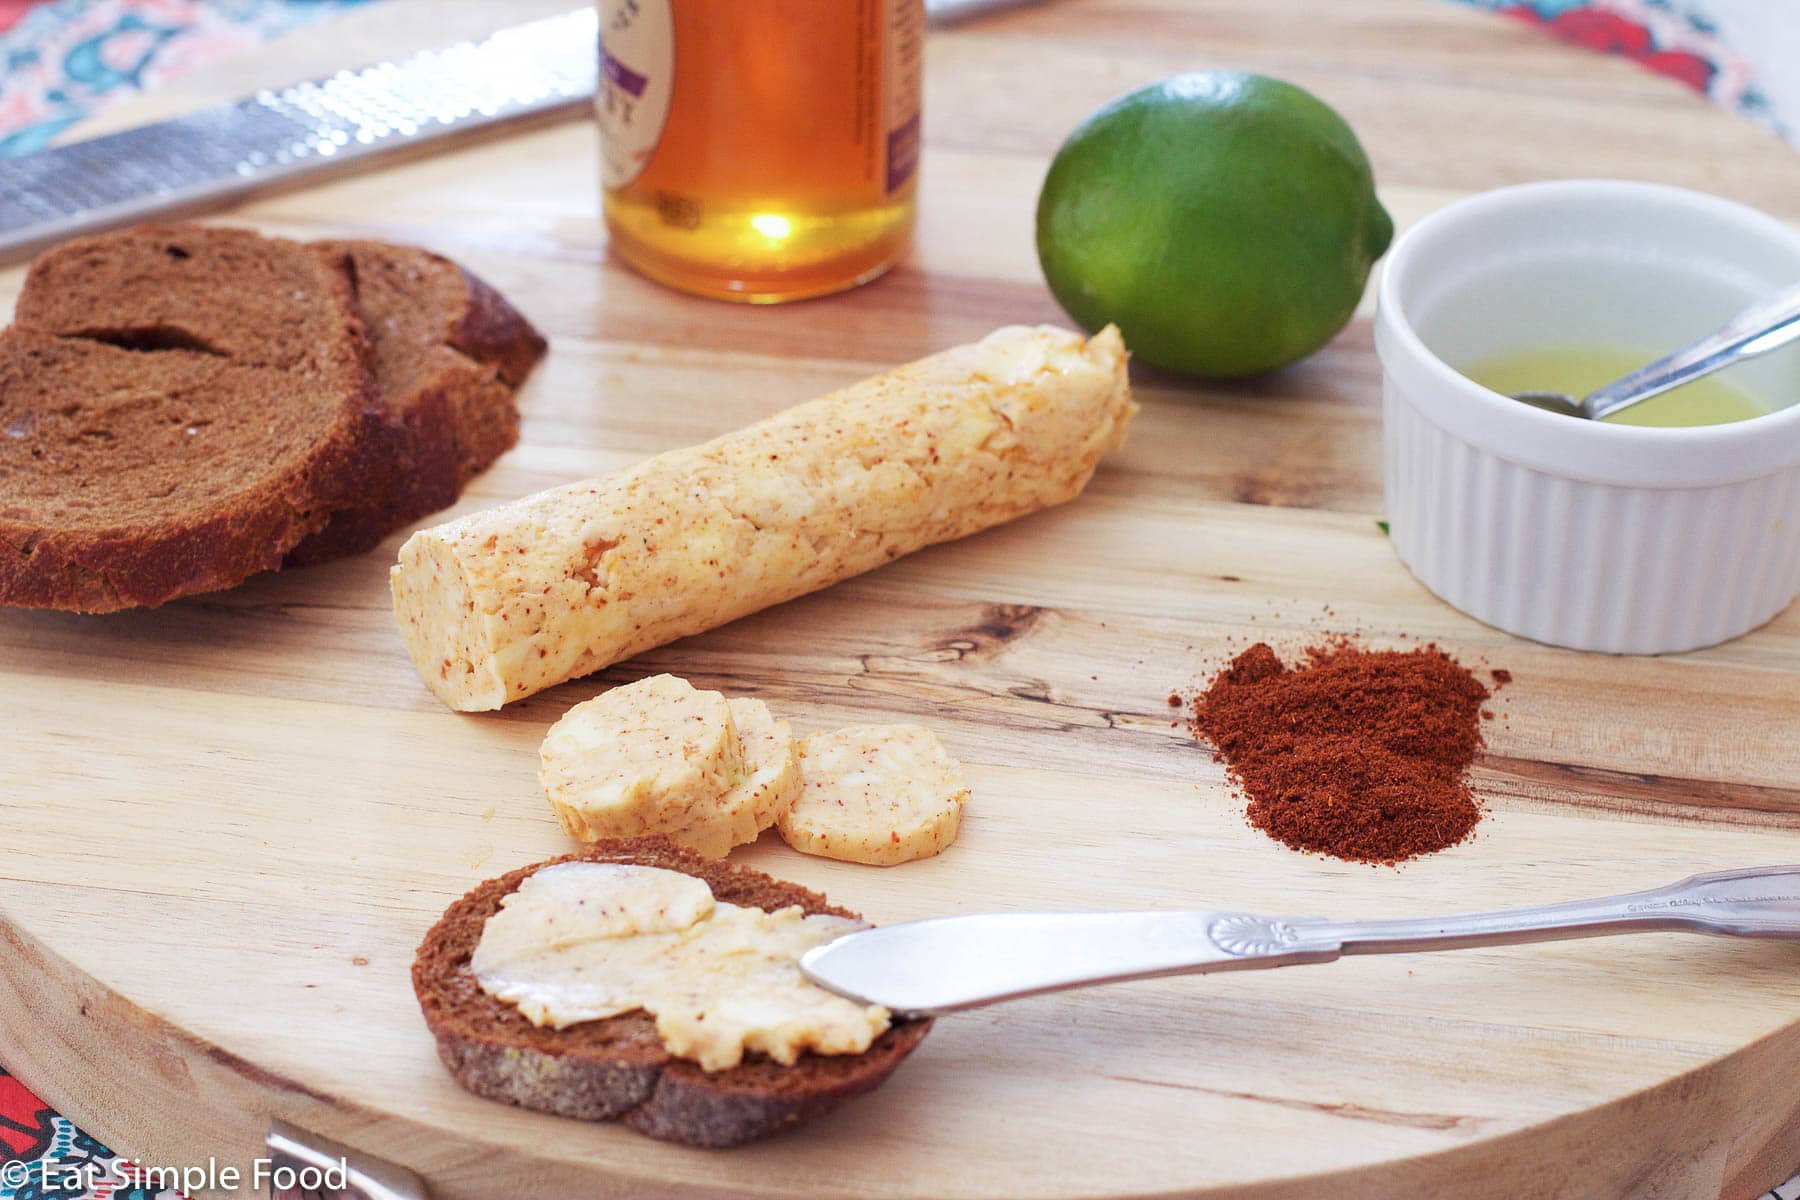 Chili Lime Compound Butter Roll on a wooden cutting board with a bowl of fresh lime juice with a teaspoon in it, fresh sliced bread, a lime, and ground chili powder with a butter knife.